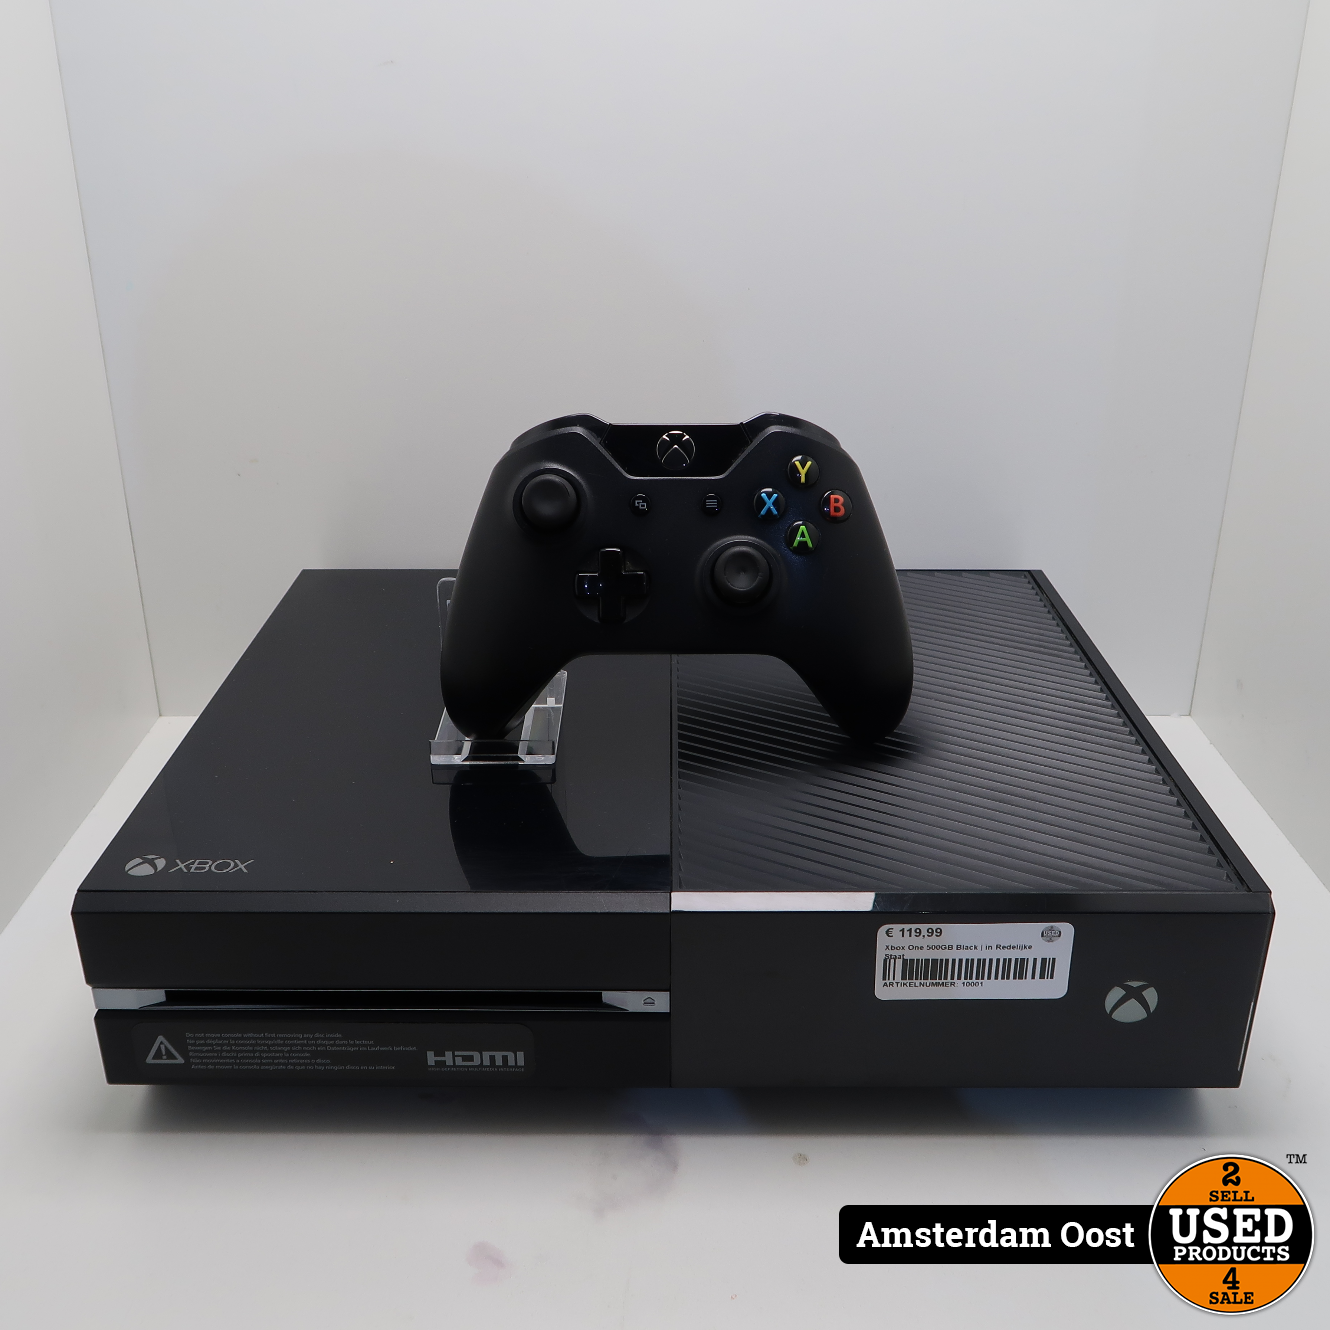 Pluche pop Idioot Presentator Xbox One 500GB Black | in Redelijke Staat - Used Products Amsterdam Oost